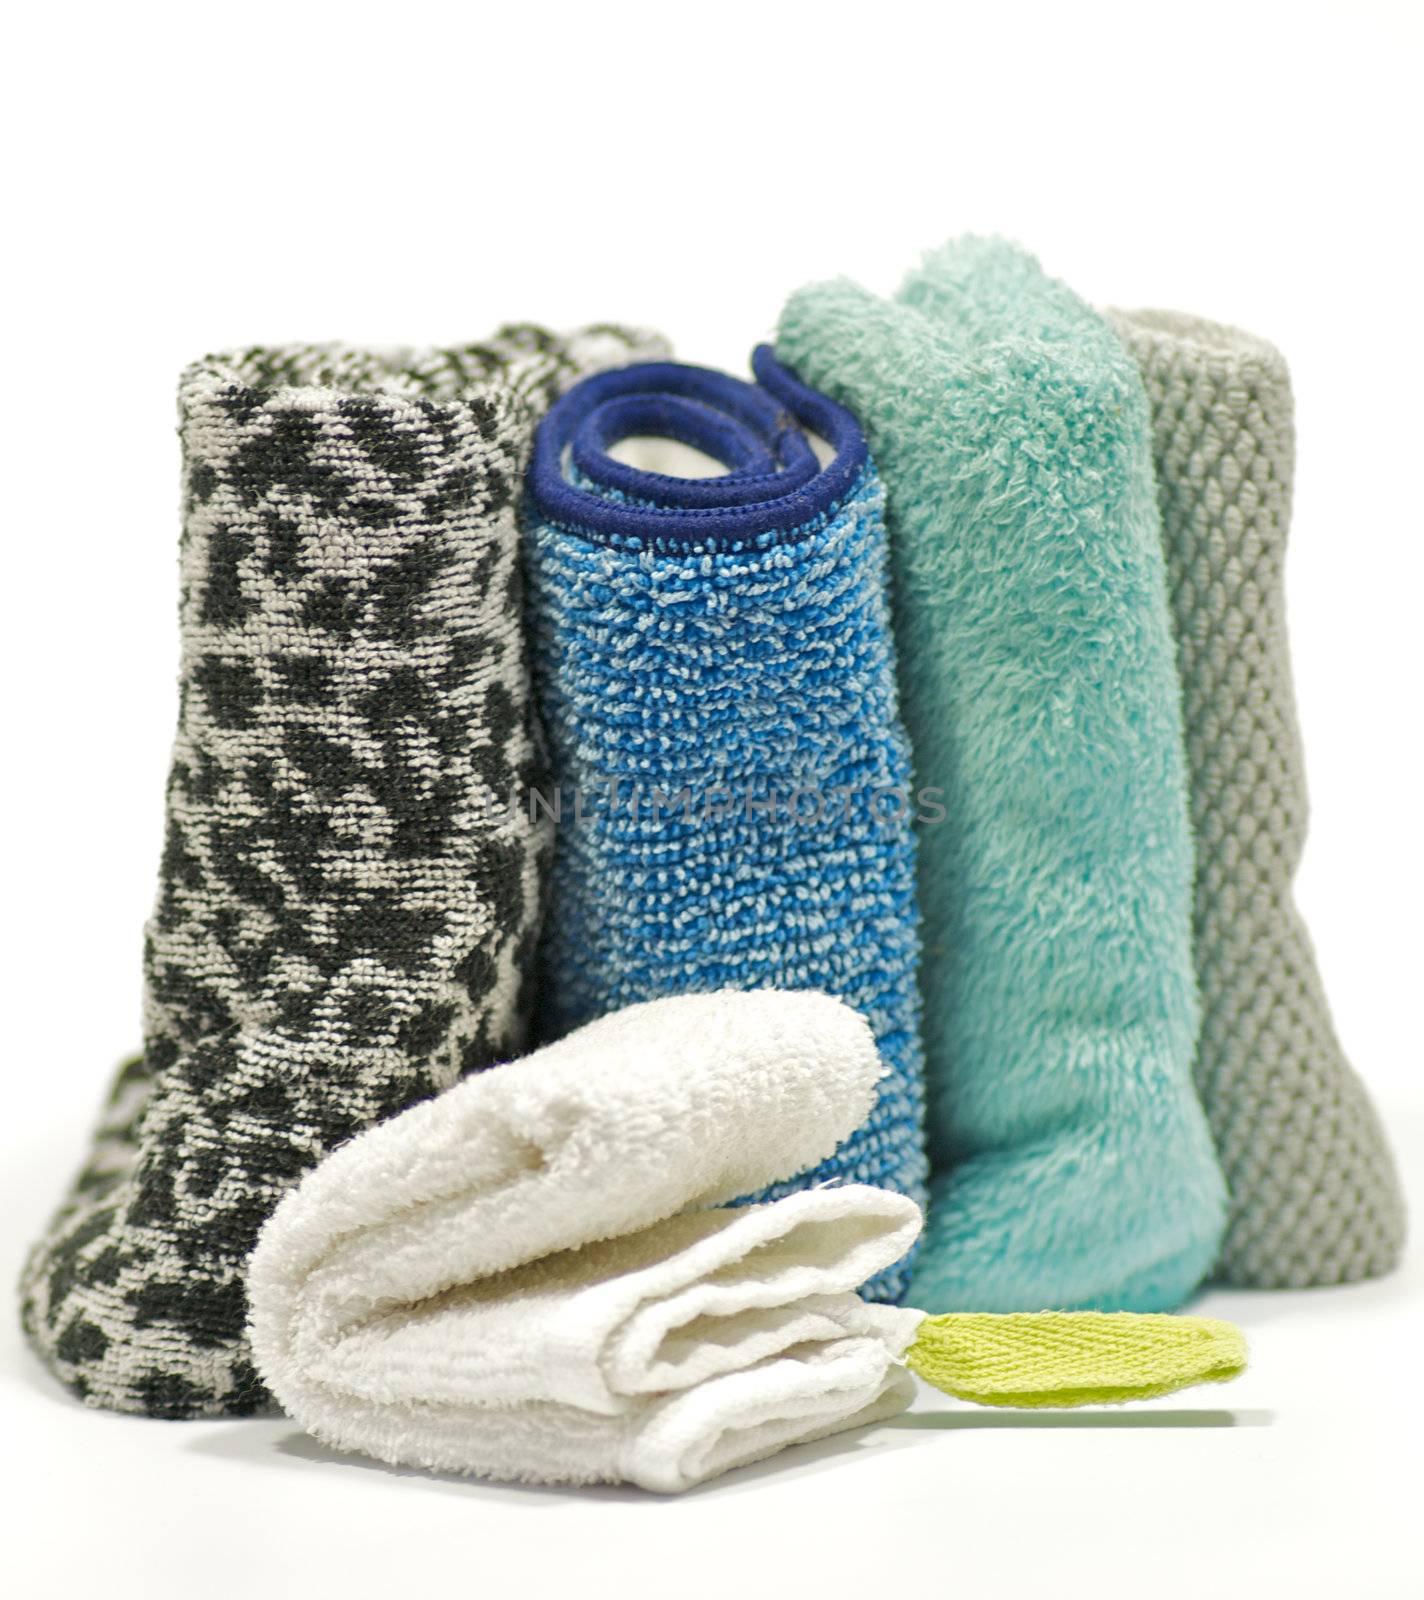 Colorful terry cloth towels by zhekos